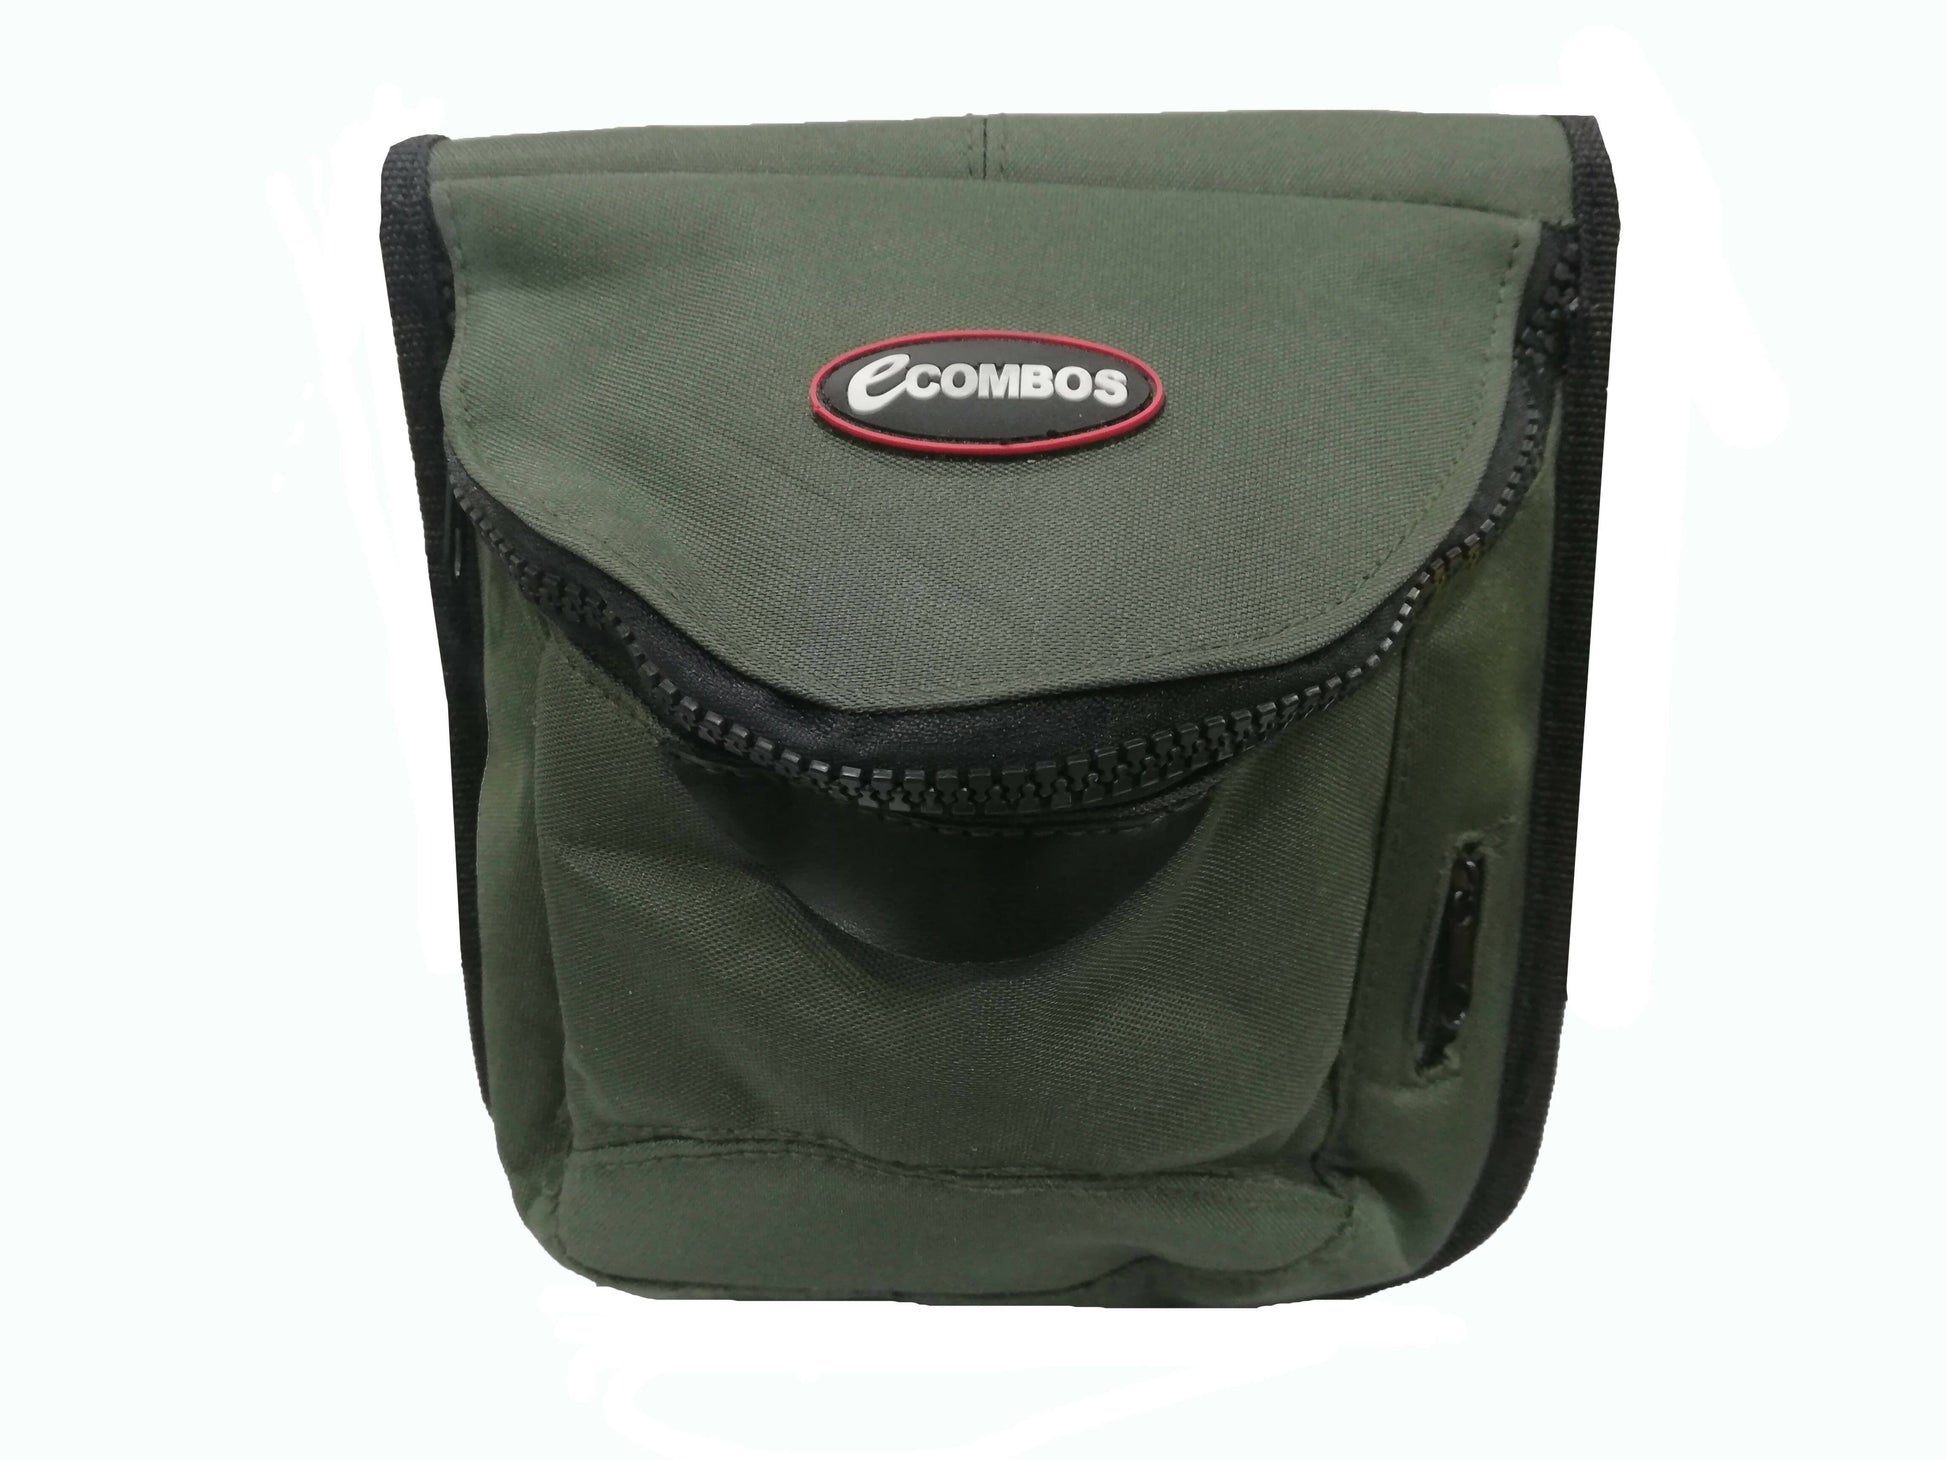 Provideolb DVD Cases Ecombos CD / DVD Case for Discman CD Player Dimensions 18x17x3.5 Green - CPB01